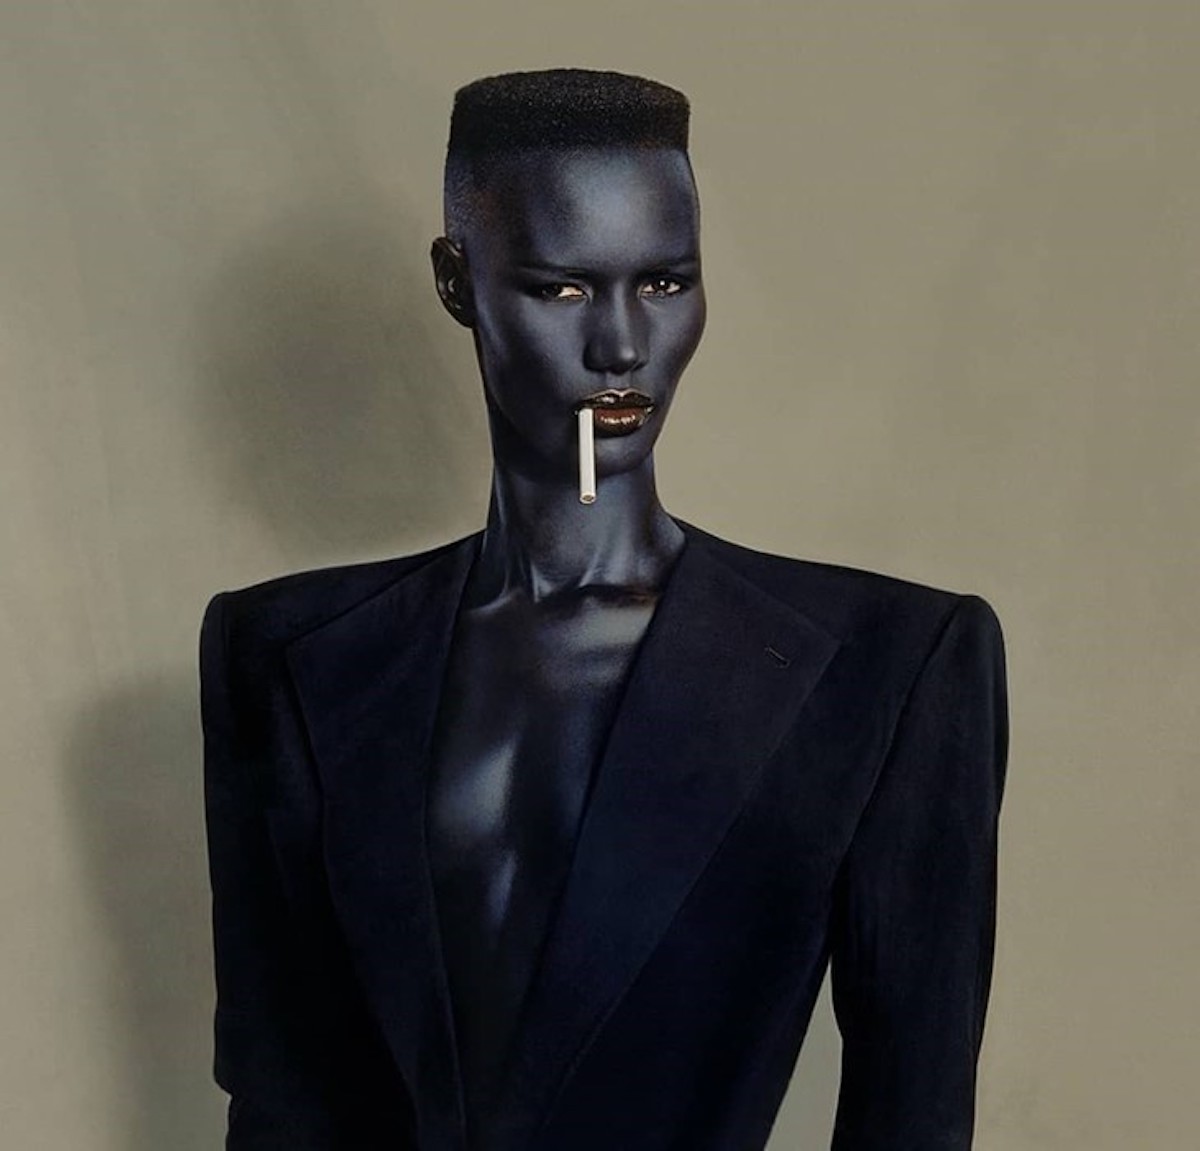 An Exhibit Exploring Grace Jones' Legacy to Open This Fall